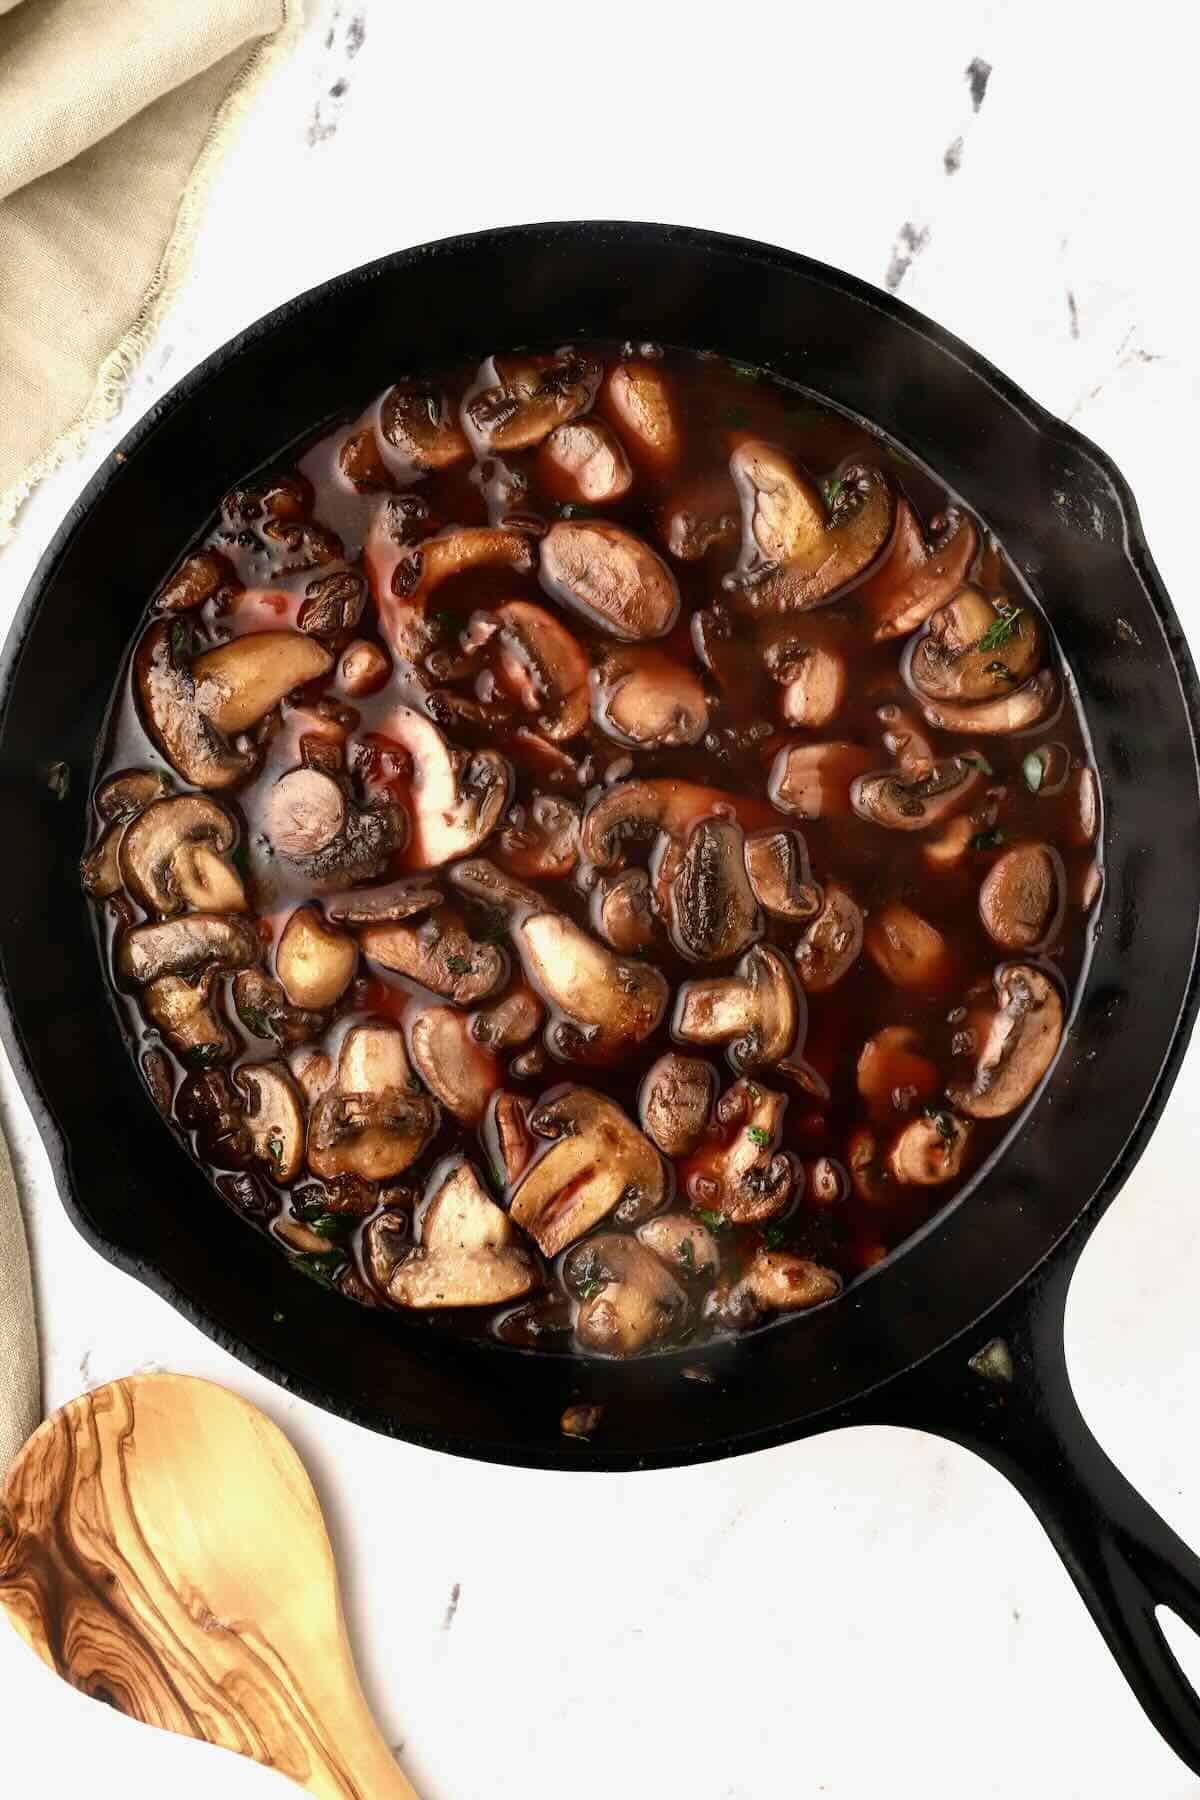 Mushrooms cooking in a red wine sauce. 